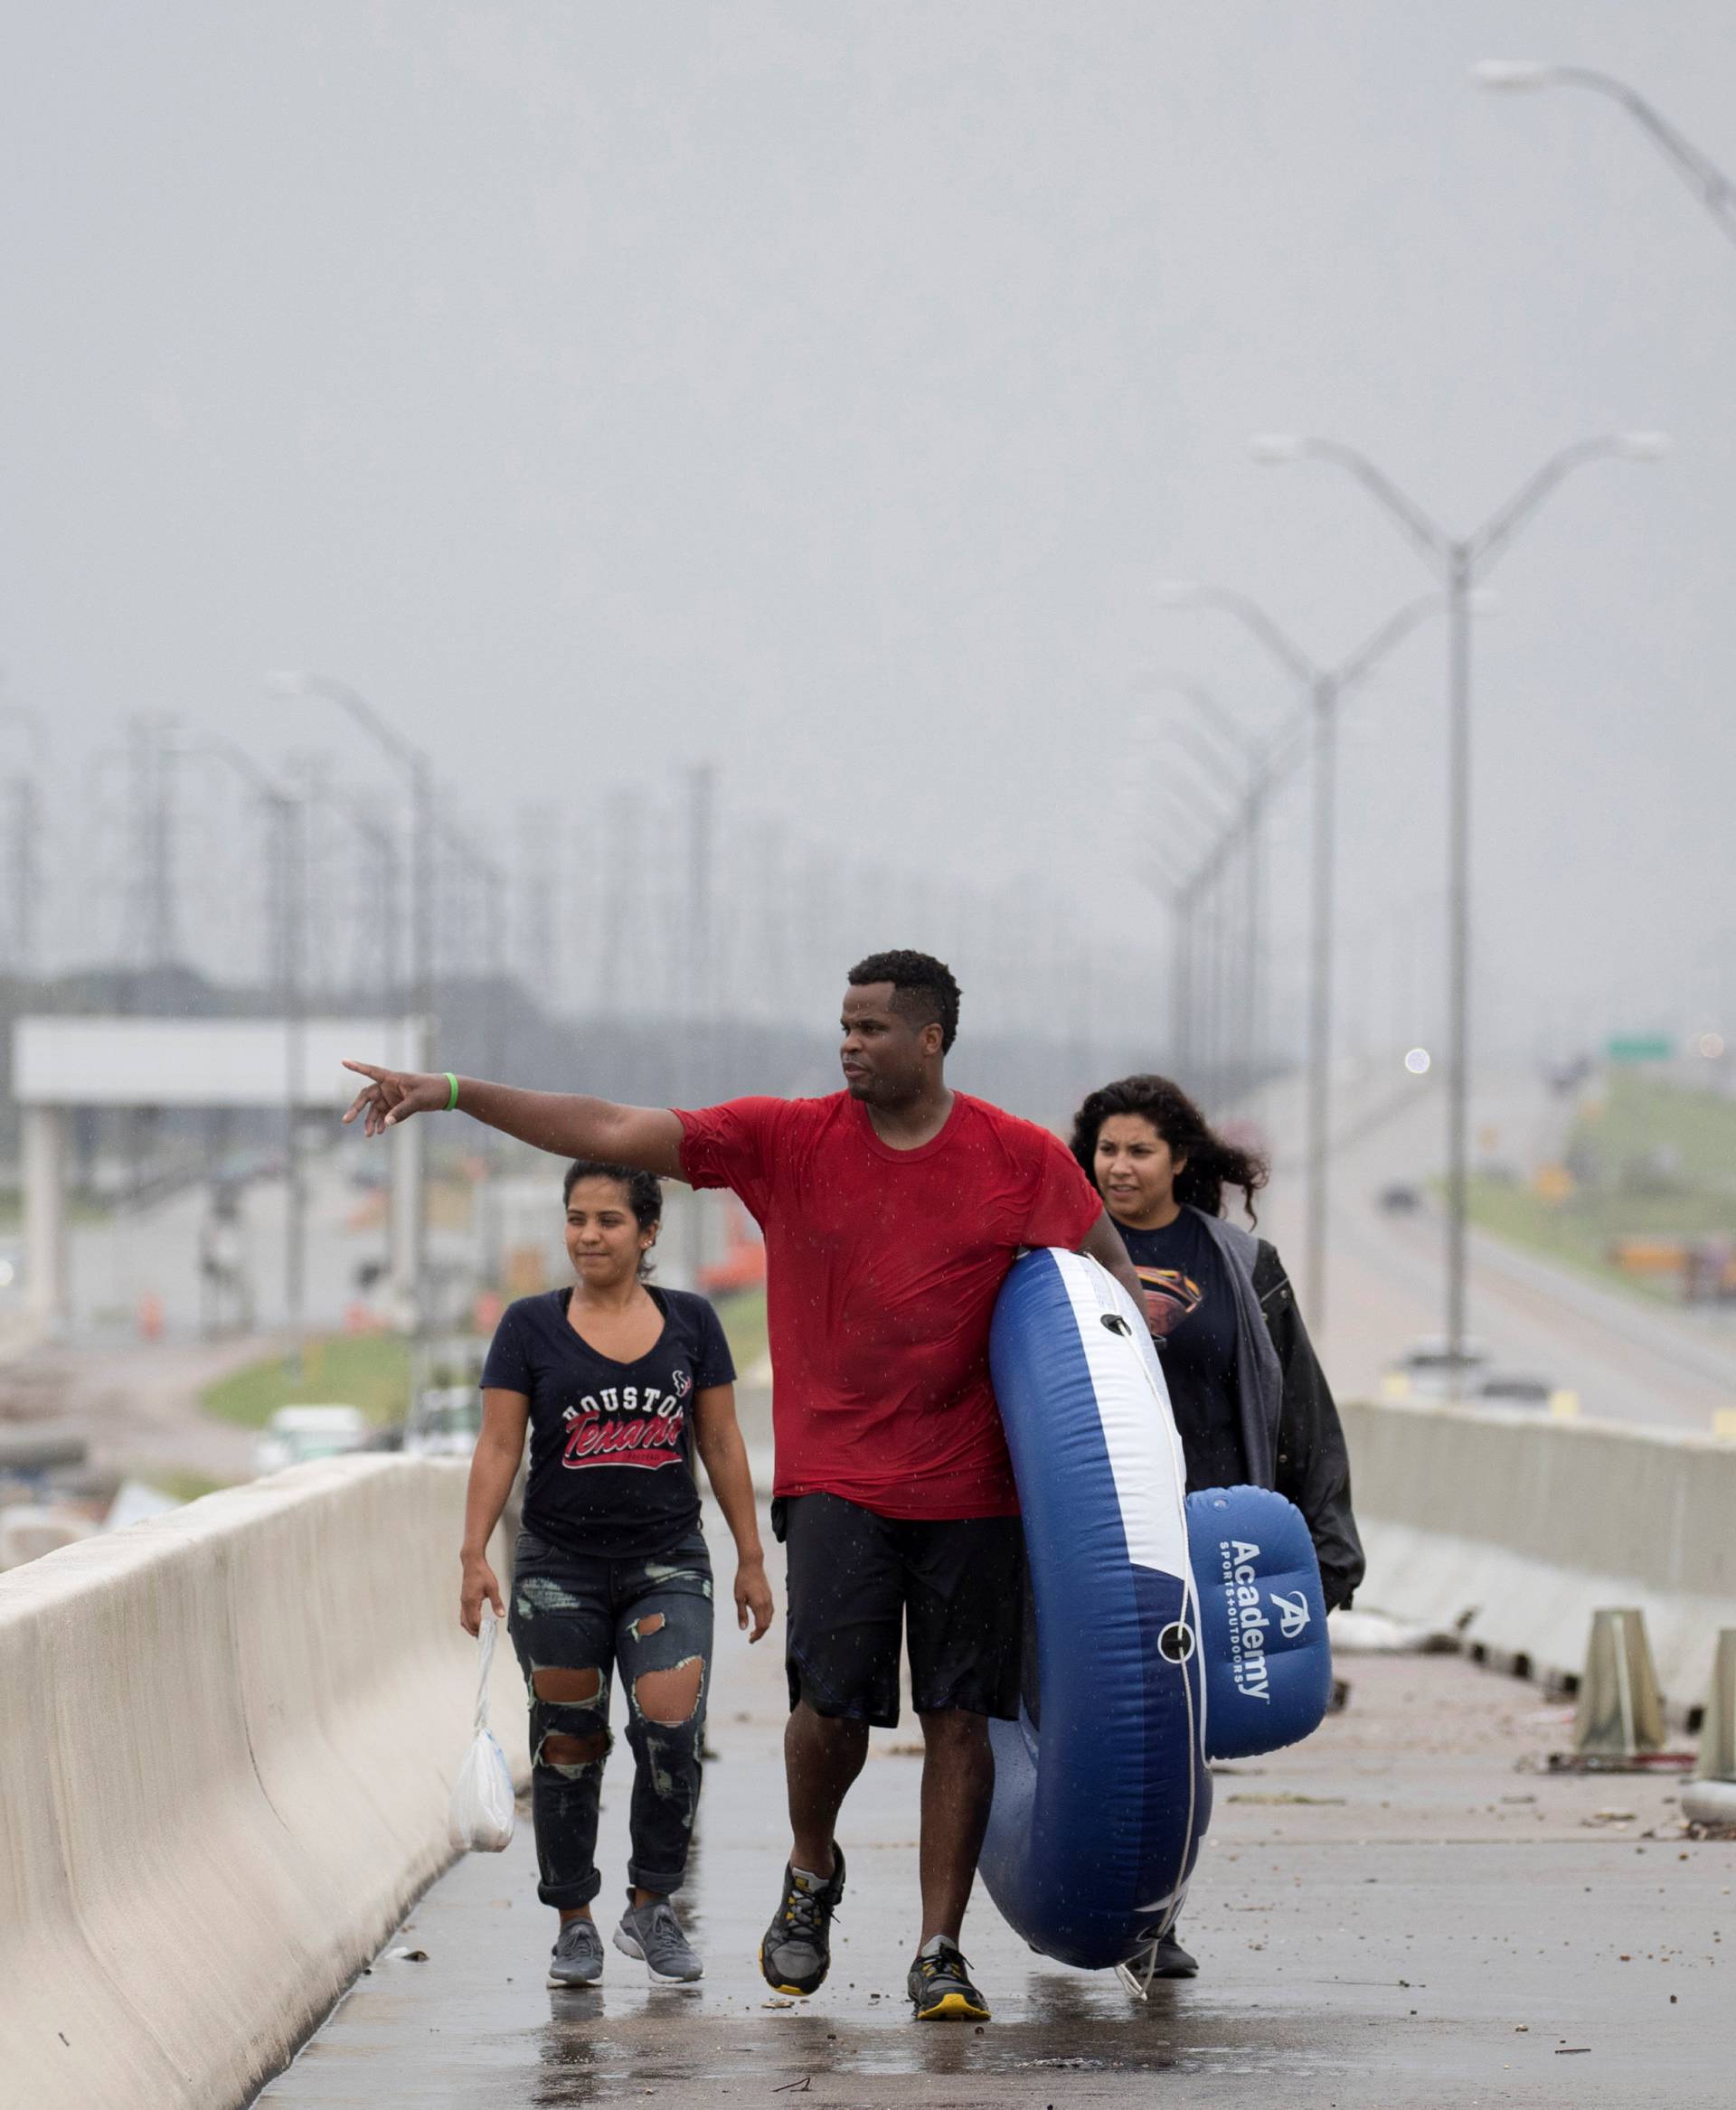 Jeremy Collier points toward a flooded shopping center after rescuing his wife Anna Collier and friend Melissa Merito from flood waters in Pearland, in the outskirts of Houston